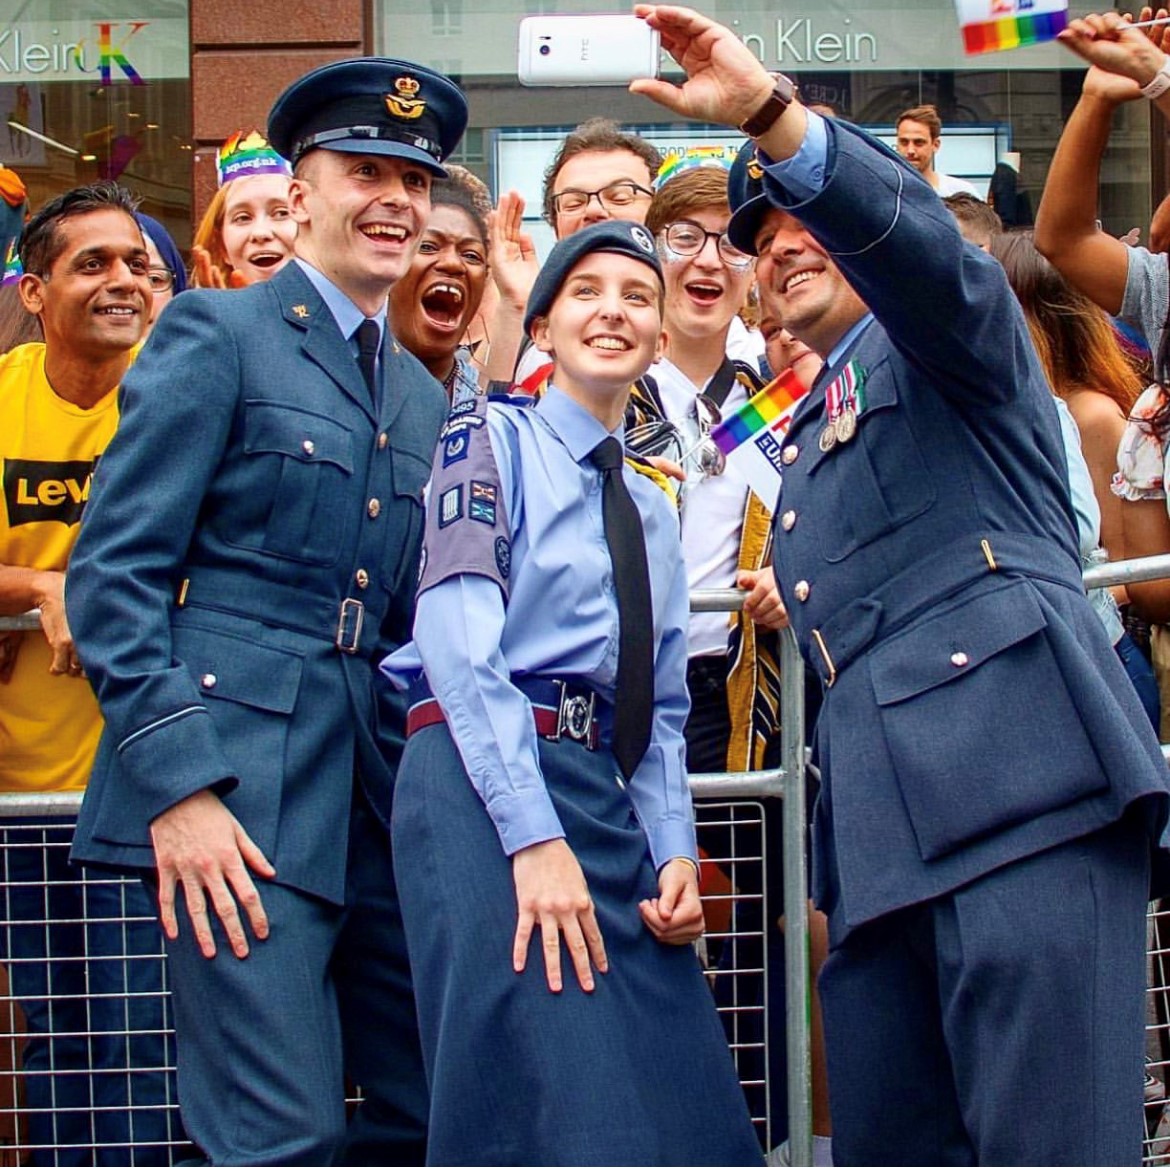 Personnel take a selfie at Pride march.